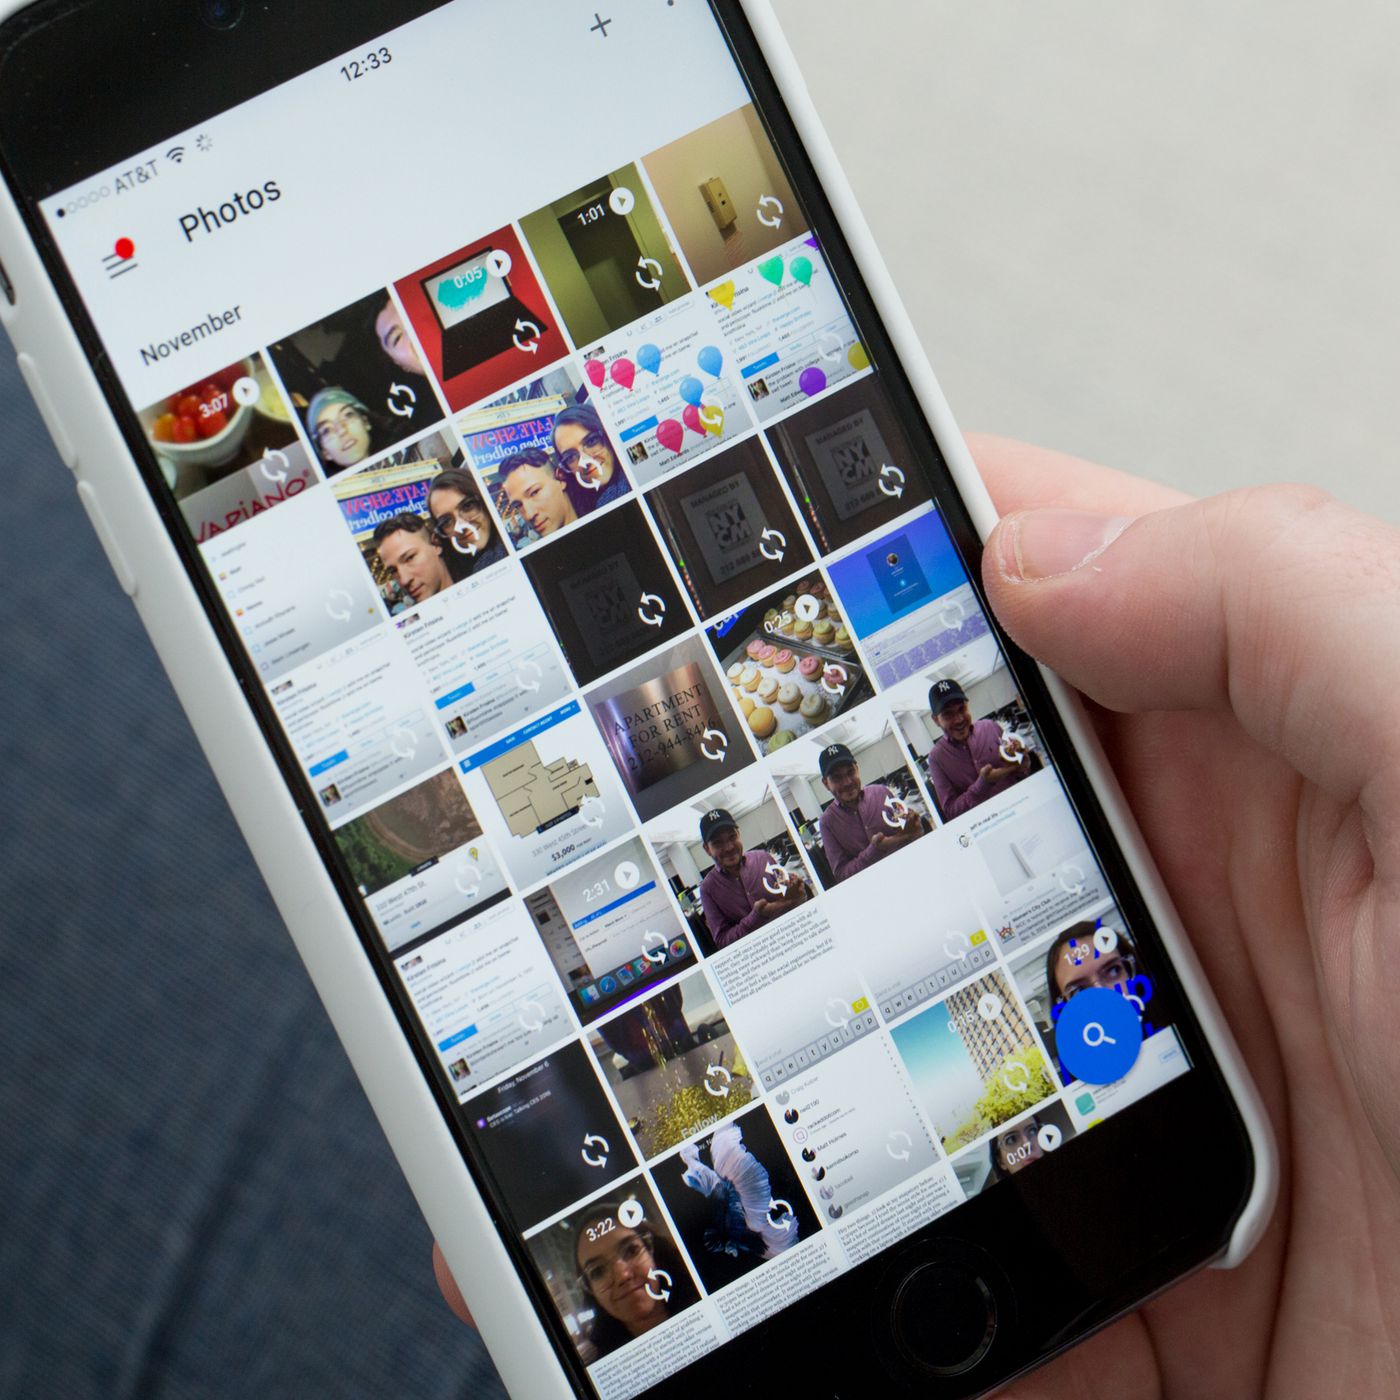 google photo ends unlimited free storage